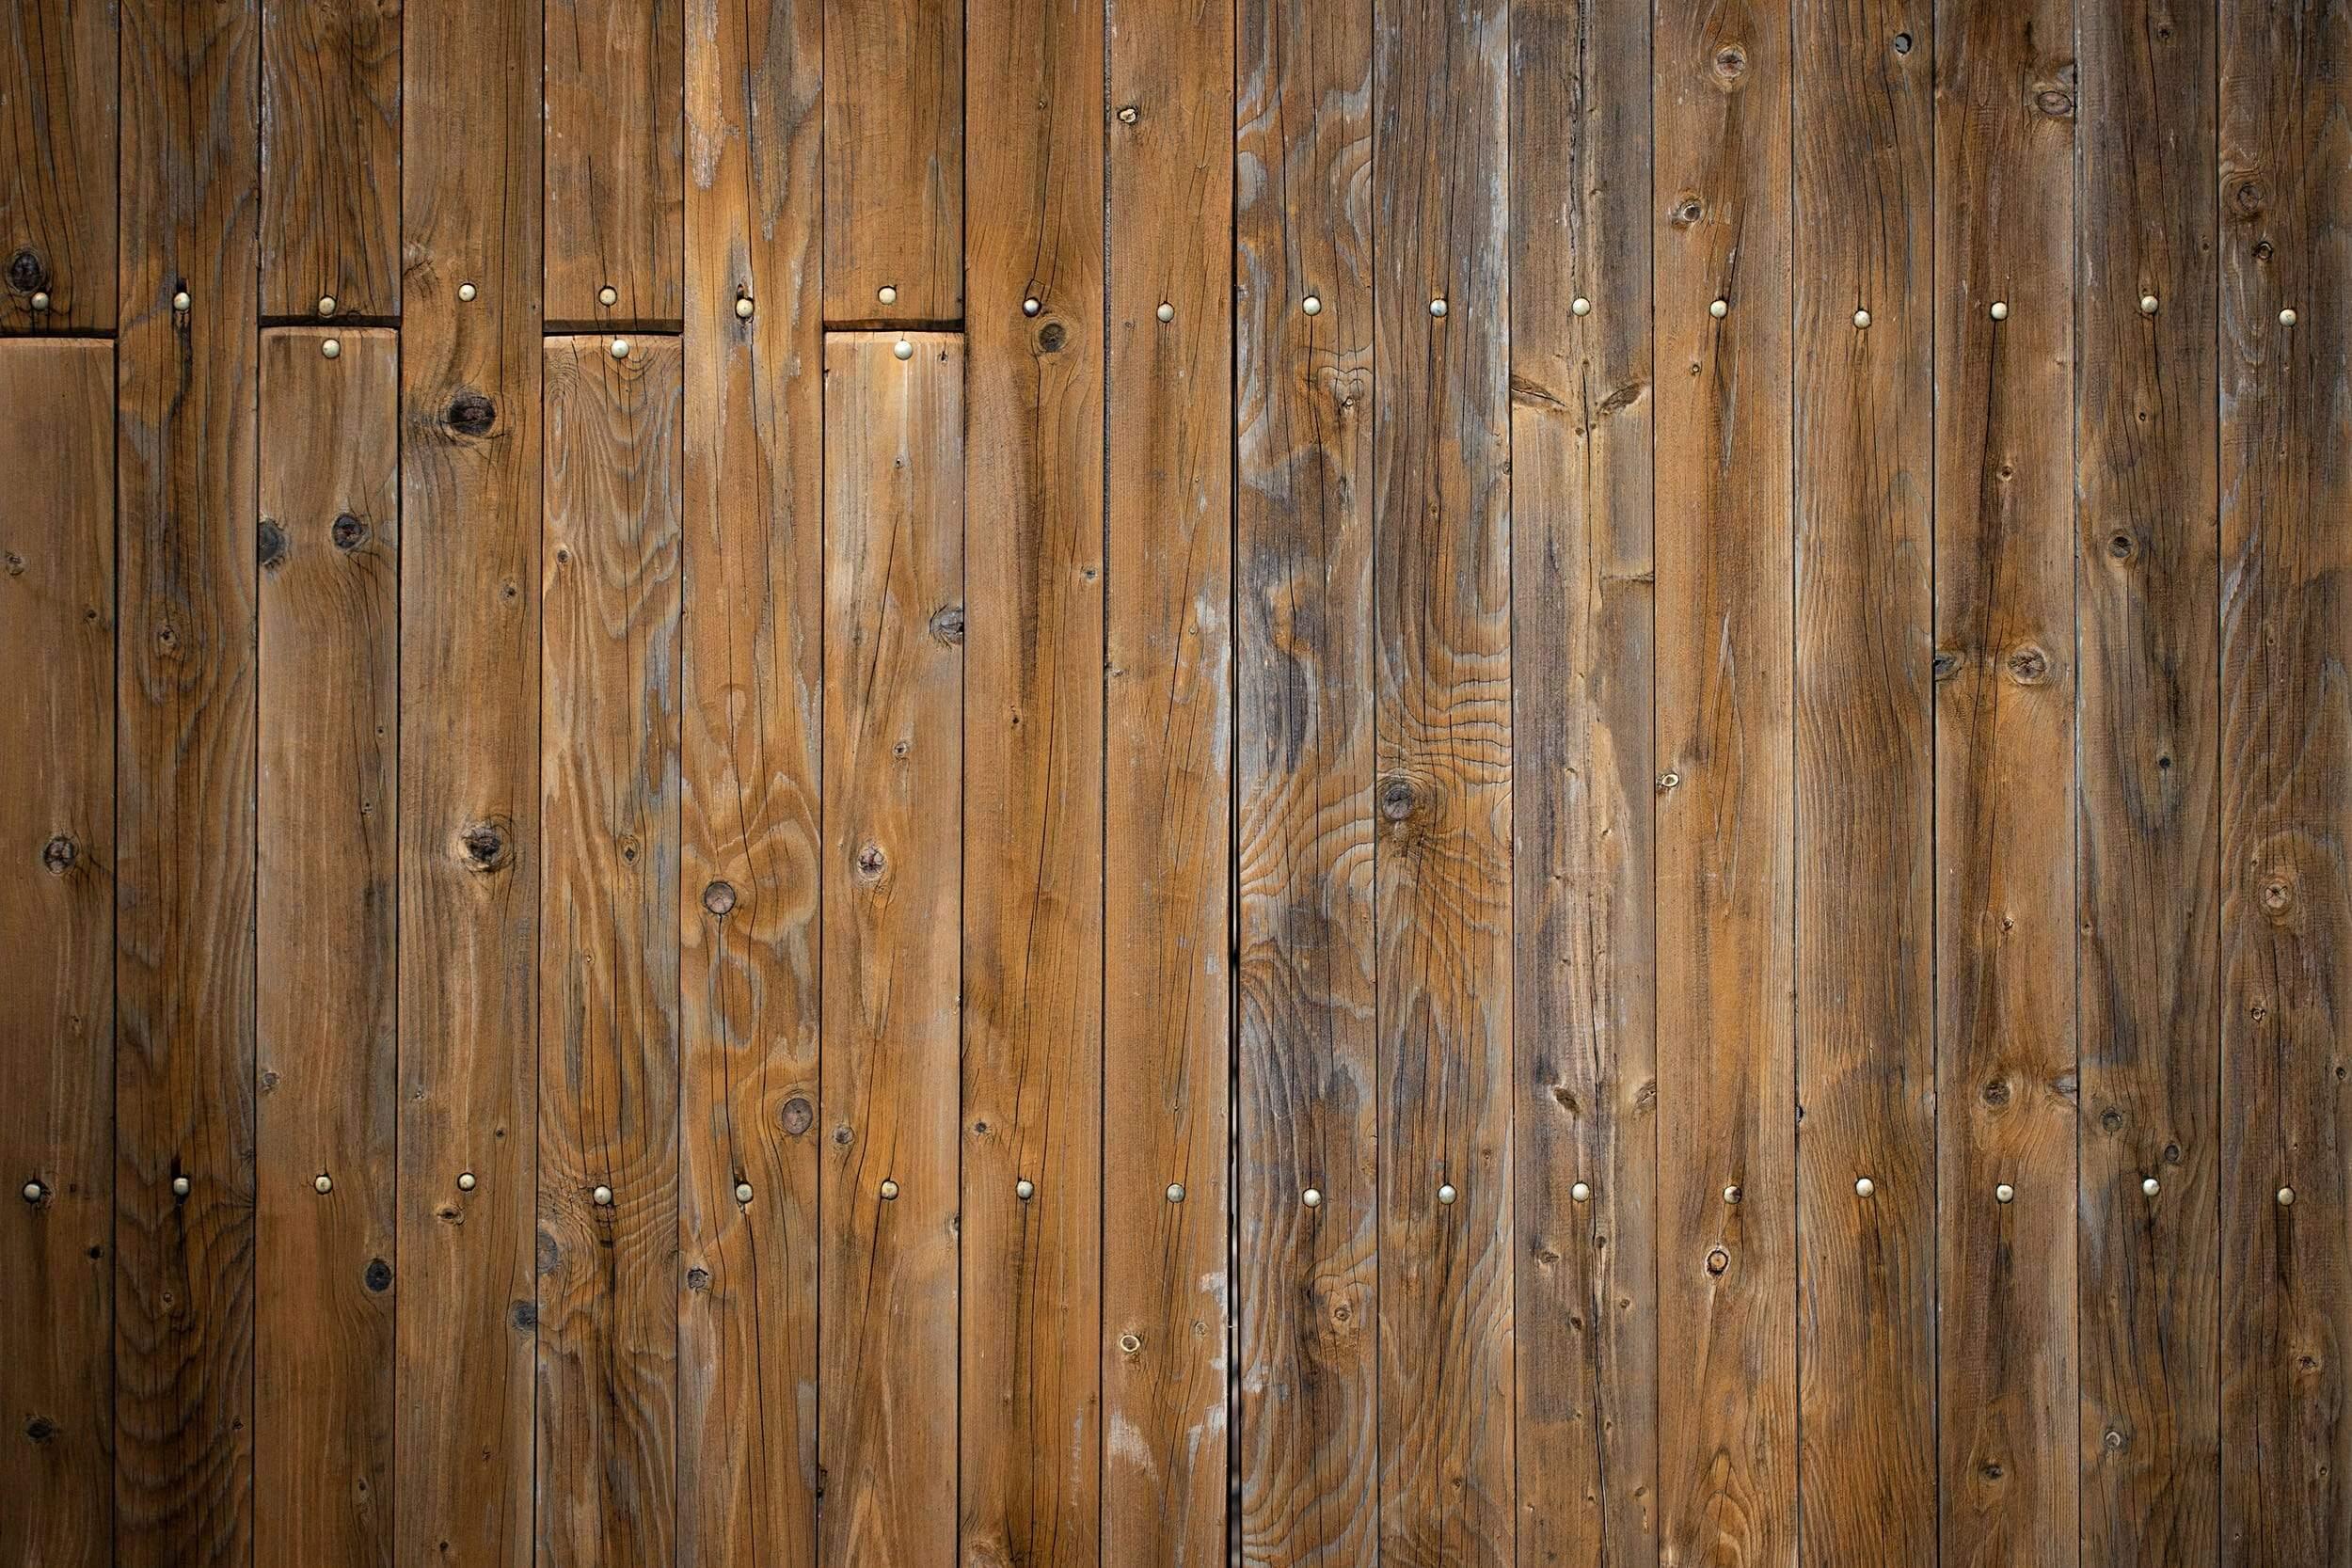 Wood Panels with Rivets